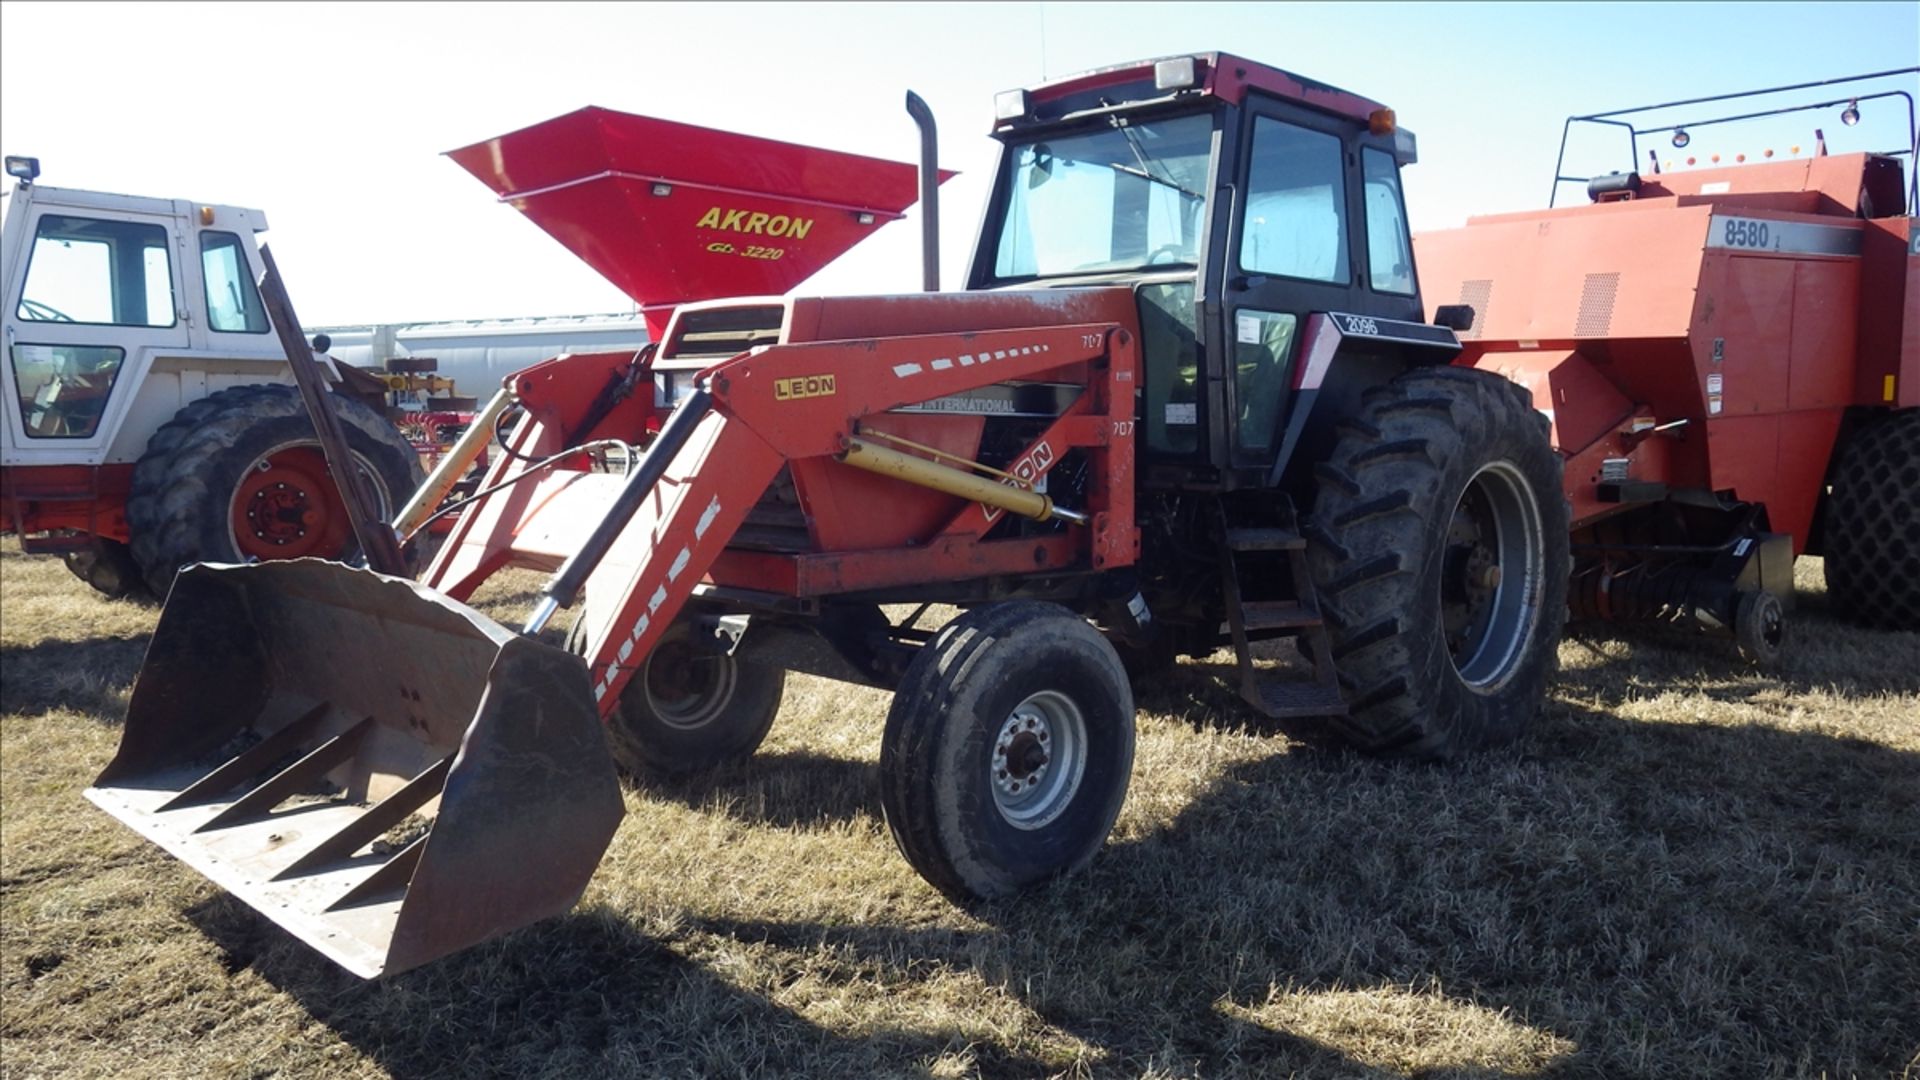 Case / International 2096 Power Shift 2 WD single wheel Vin# 9940599 with 3738 Hours showing, Radio,